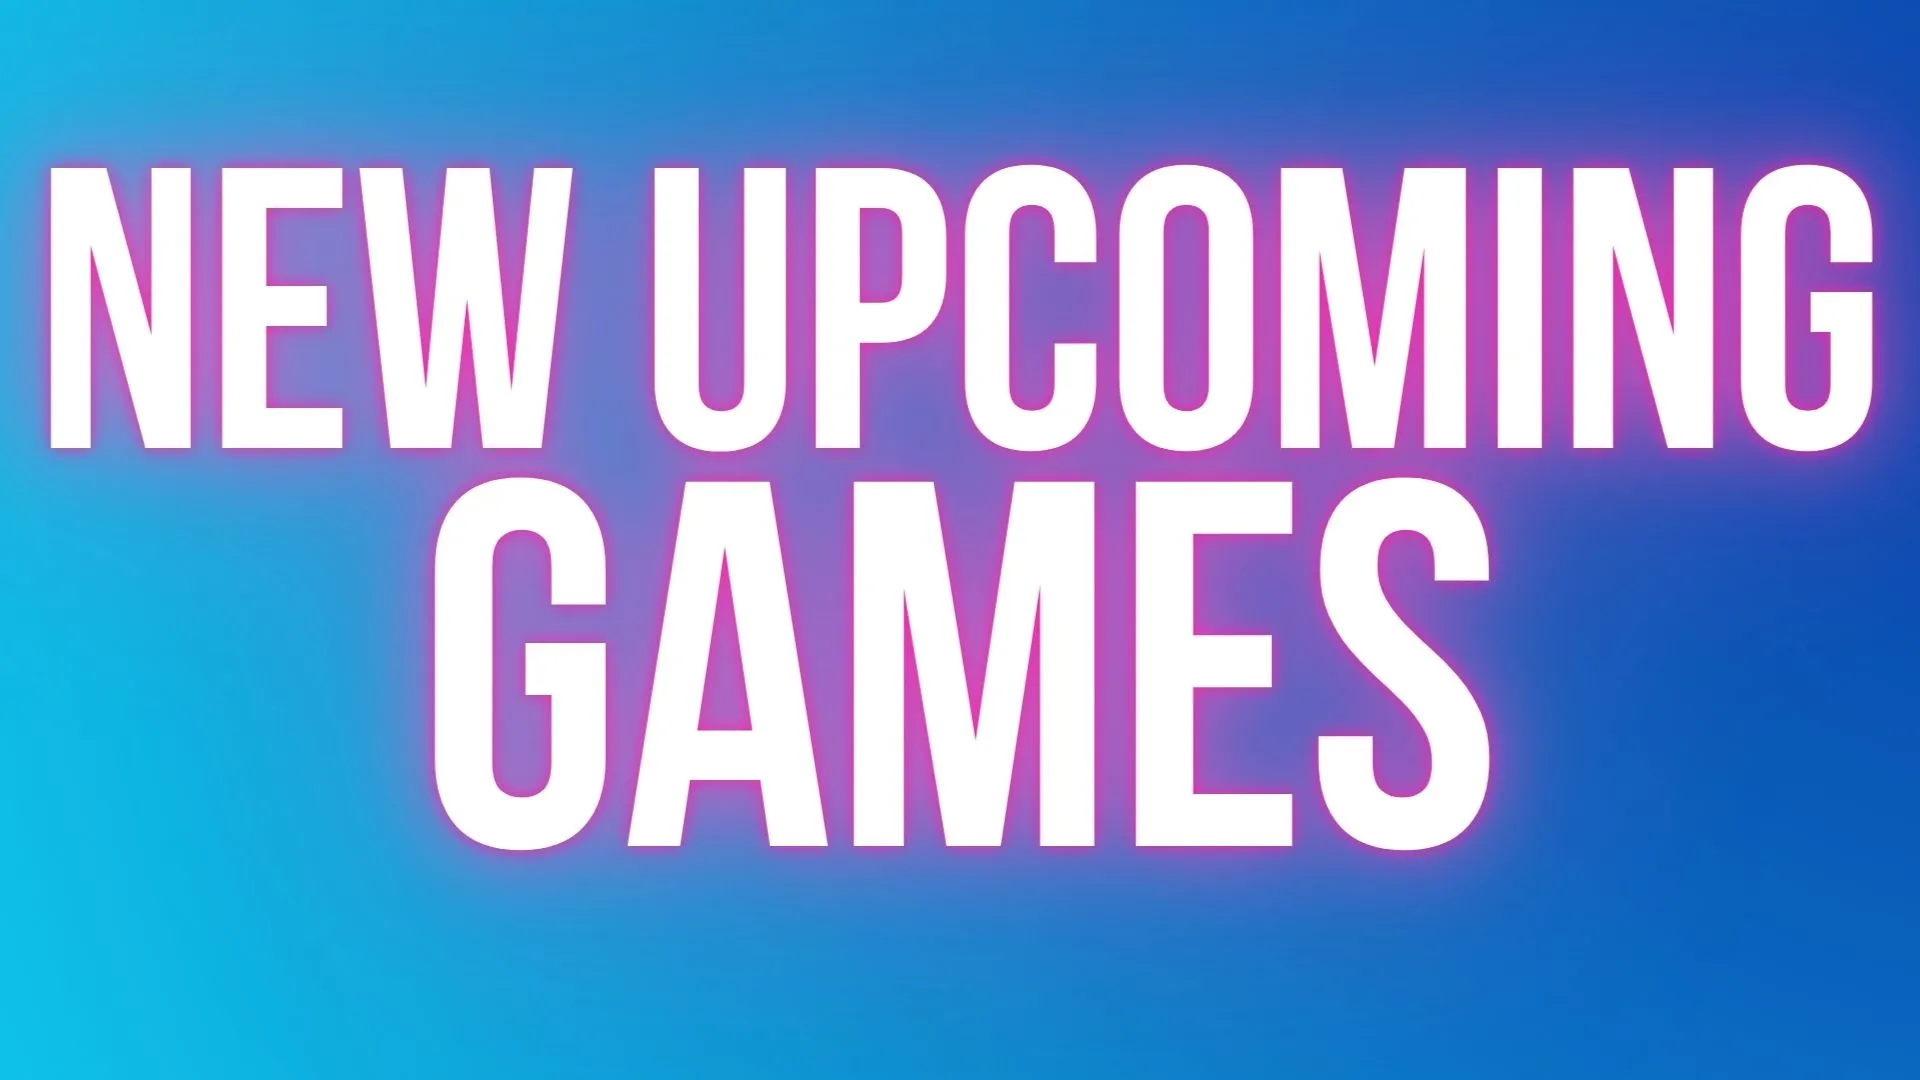 New Upcoming Games: The Best Games Revealed on June 5th, 2021